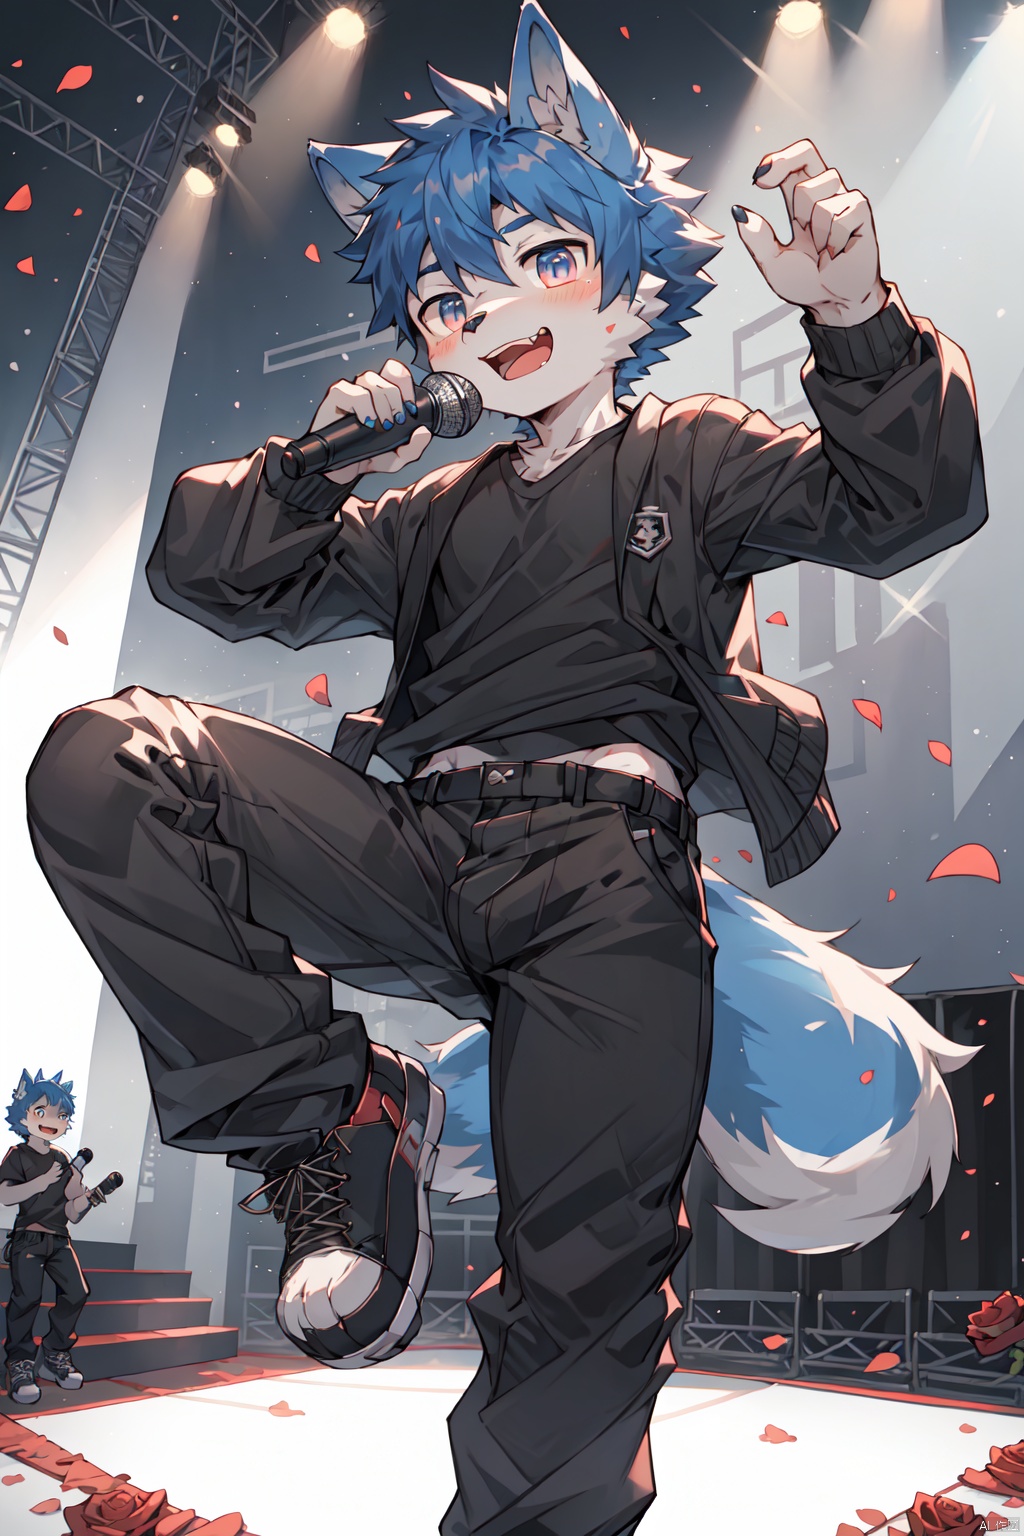  1Boys,aged down,correct body structure,one leg on the stage,singing,detail eyes, shota,wolf furry,blued hair,shota,black shirt,black trousers,with rose petals around body,excited,holding microphone